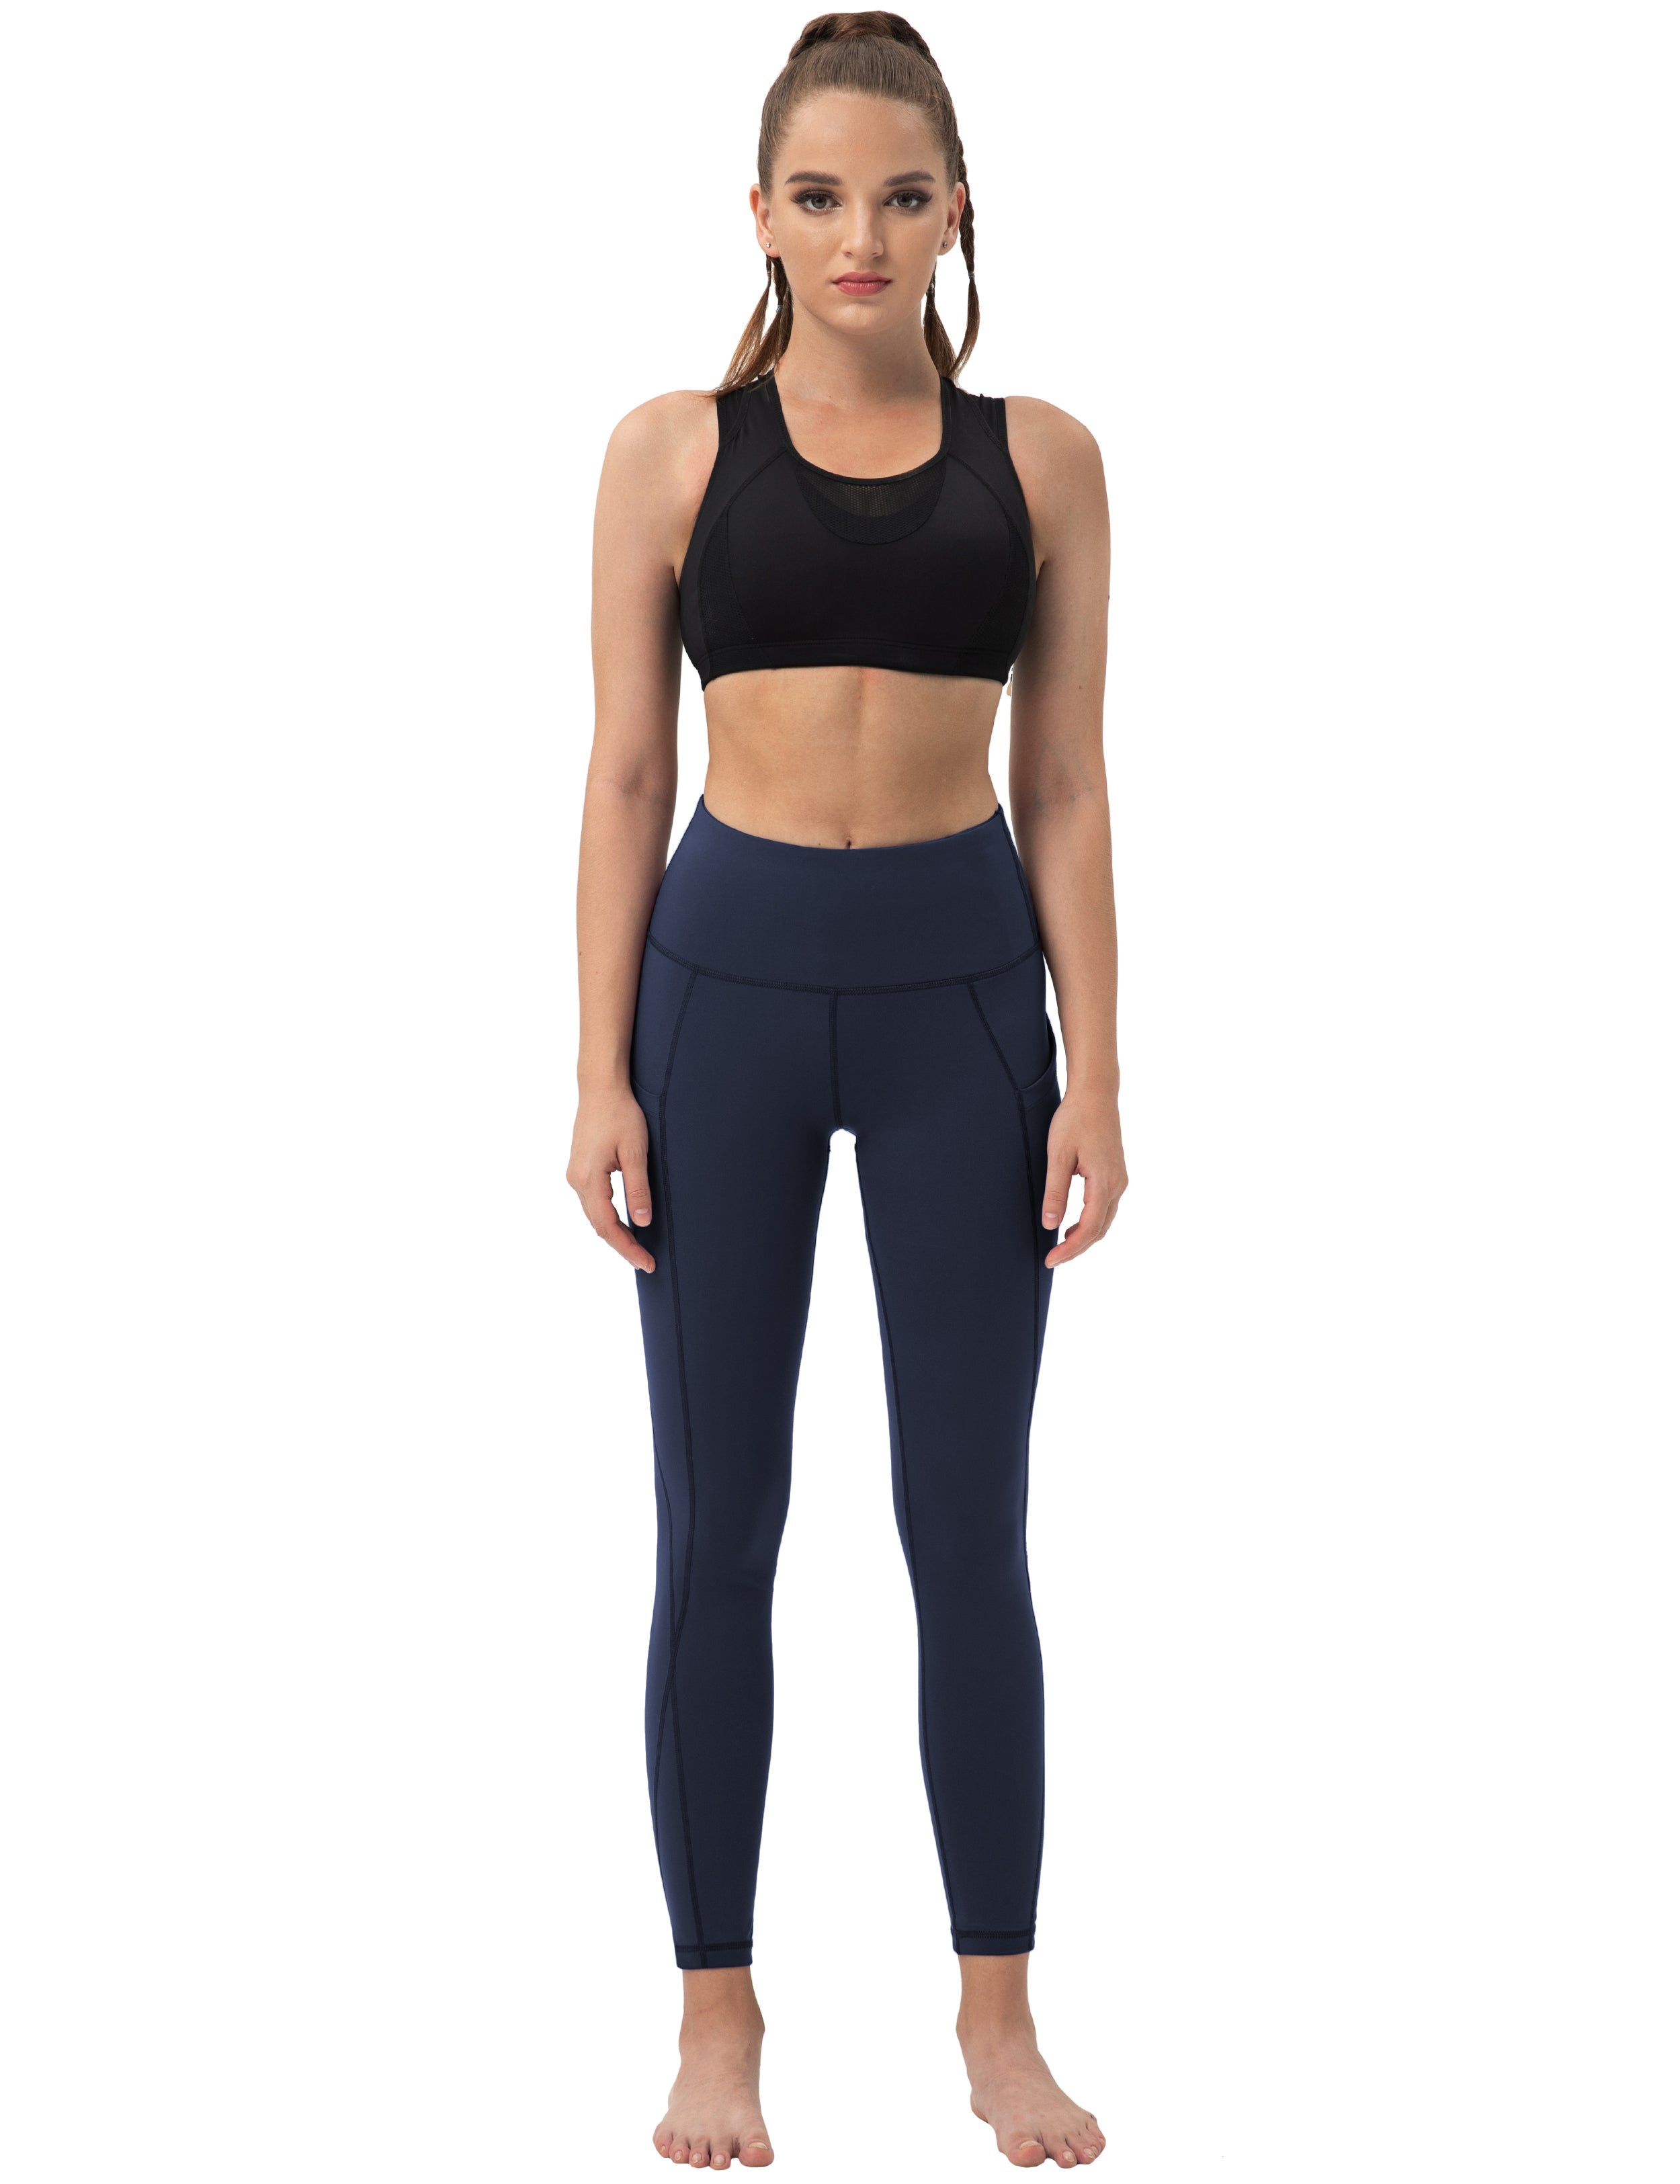 High Waist Side Pockets Pilates Pants darknavy 75% Nylon, 25% Spandex Fabric doesn't attract lint easily 4-way stretch No see-through Moisture-wicking Tummy control Inner pocket